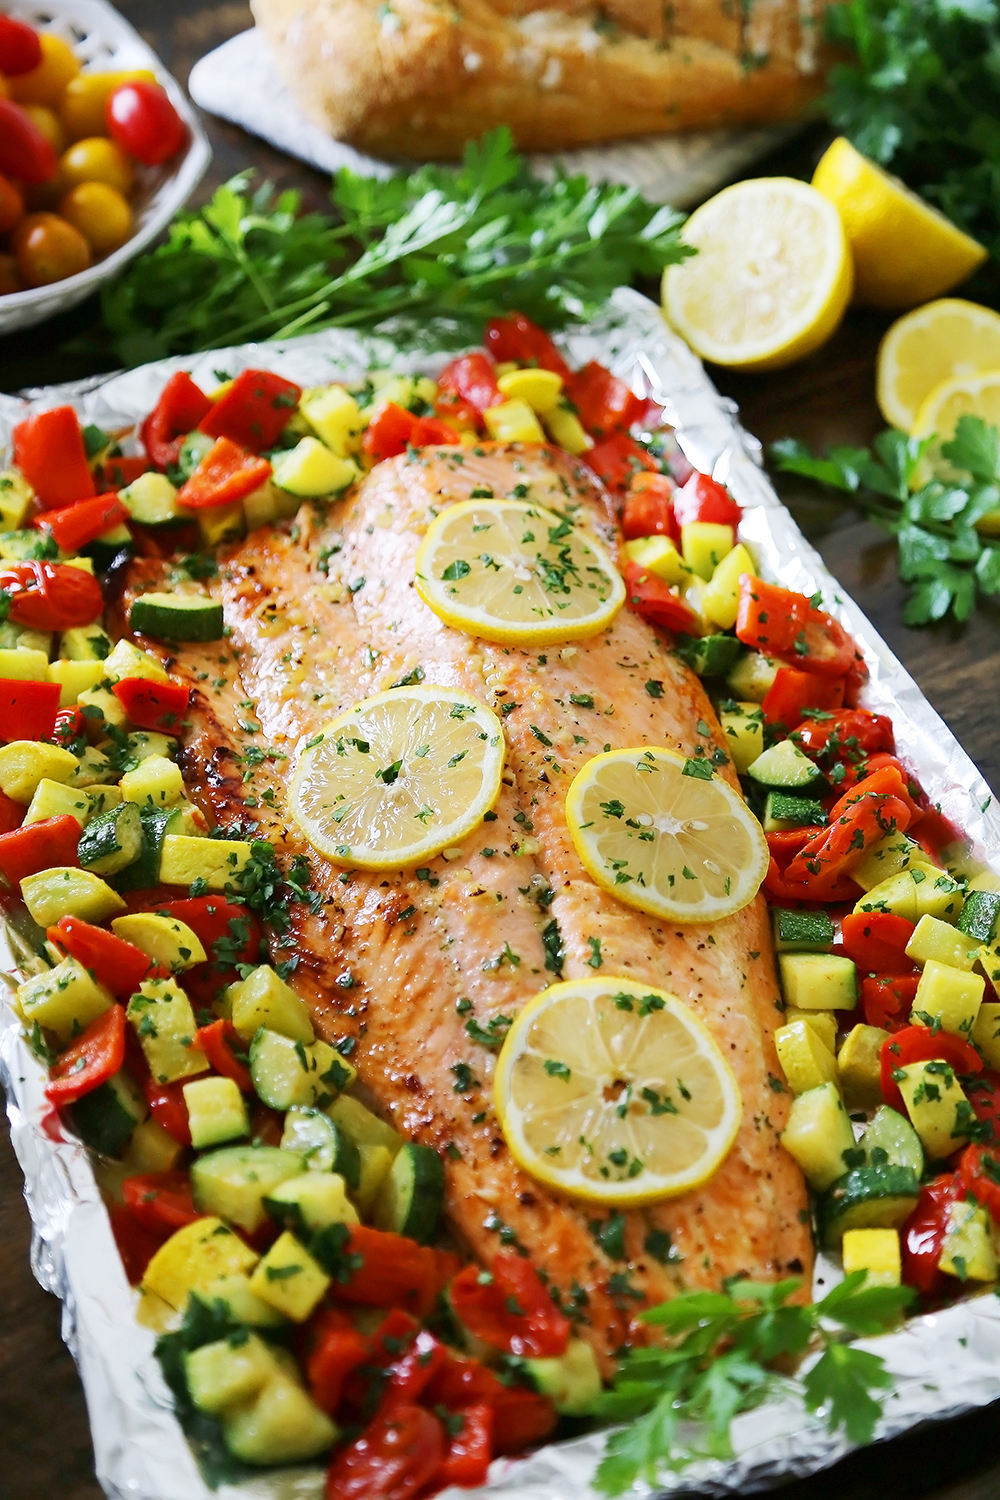 Lemon-Garlic Honey Butter Salmon & Veggies in Foil - Juicy, flaky roasted salmon with lemon-garlic honey butter and tender summer veggies! One pan full of hearty, healthy goodness! thecomfortofcooking.com